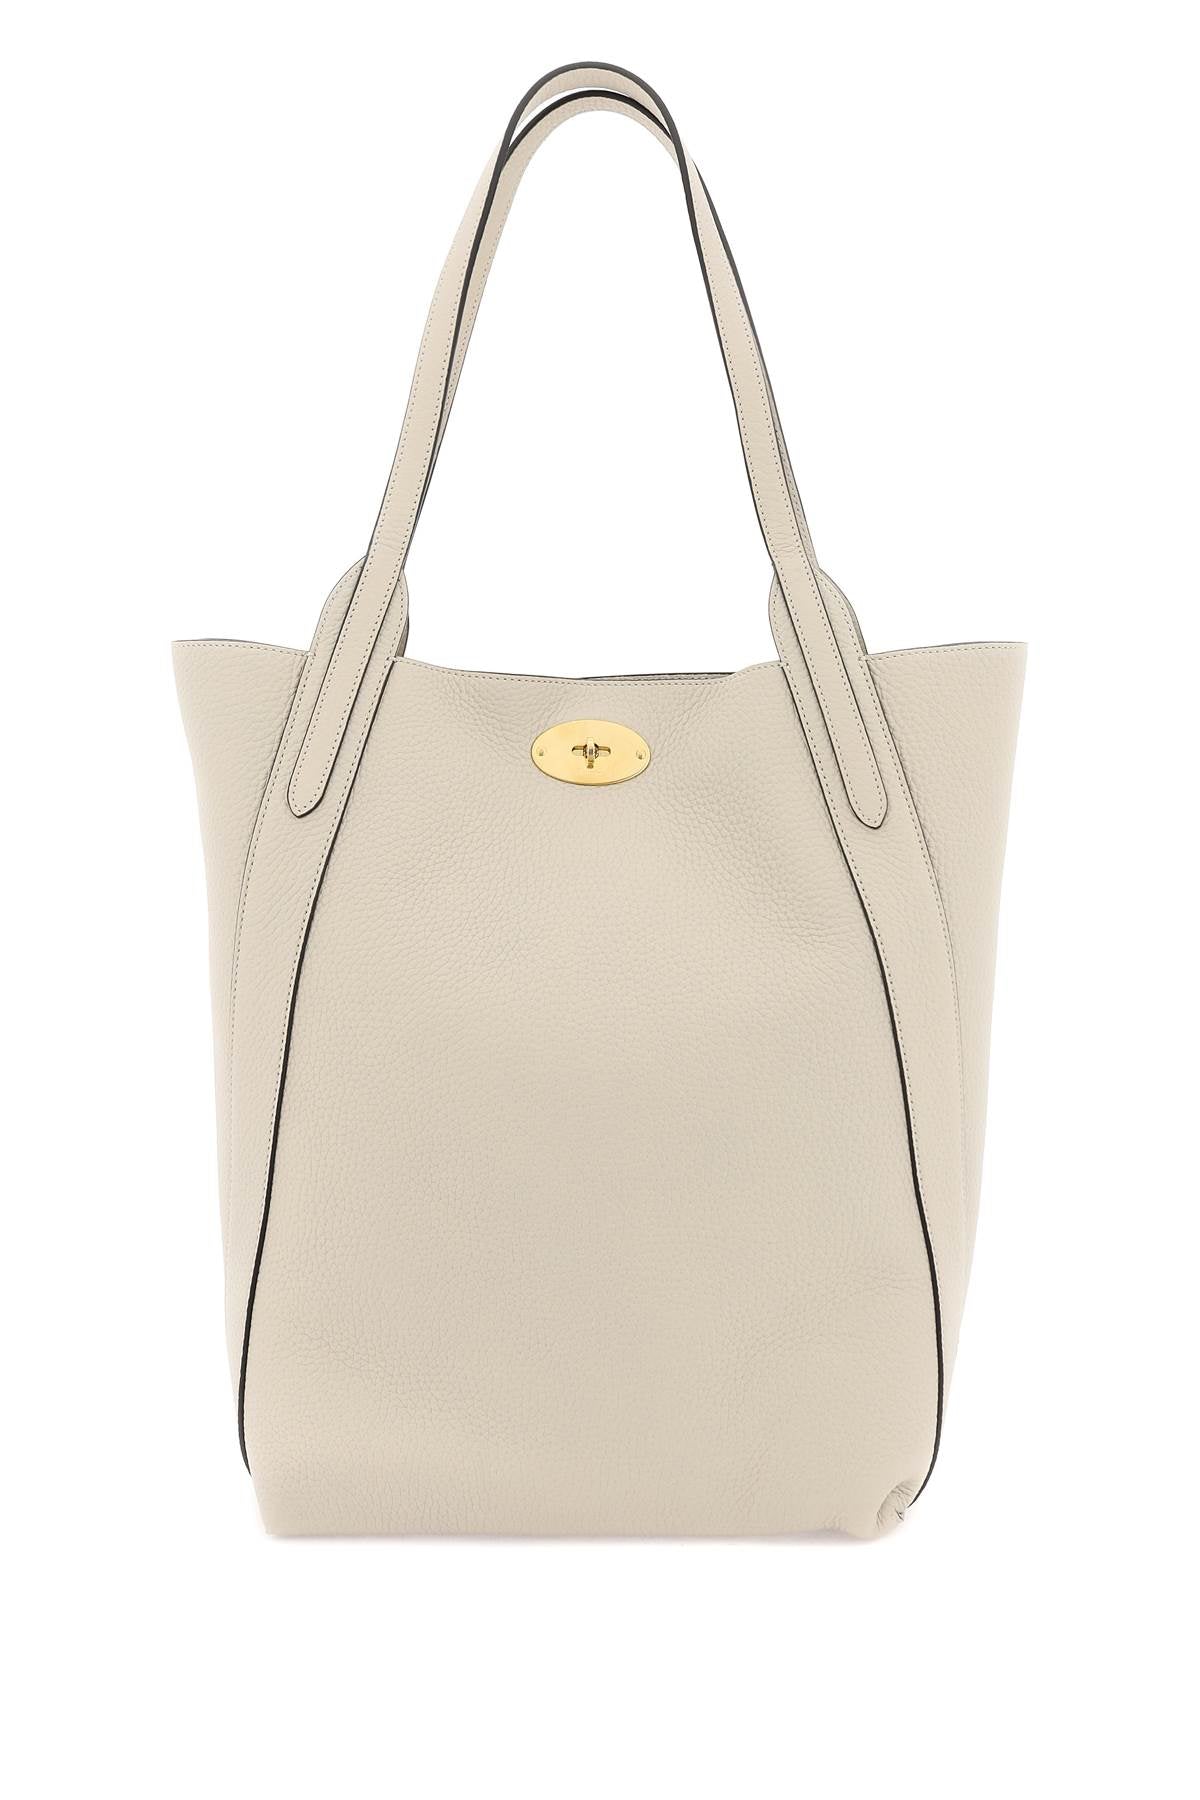 MULBERRY Grained Leather Bayswater Tote Handbag for Women - Neutral